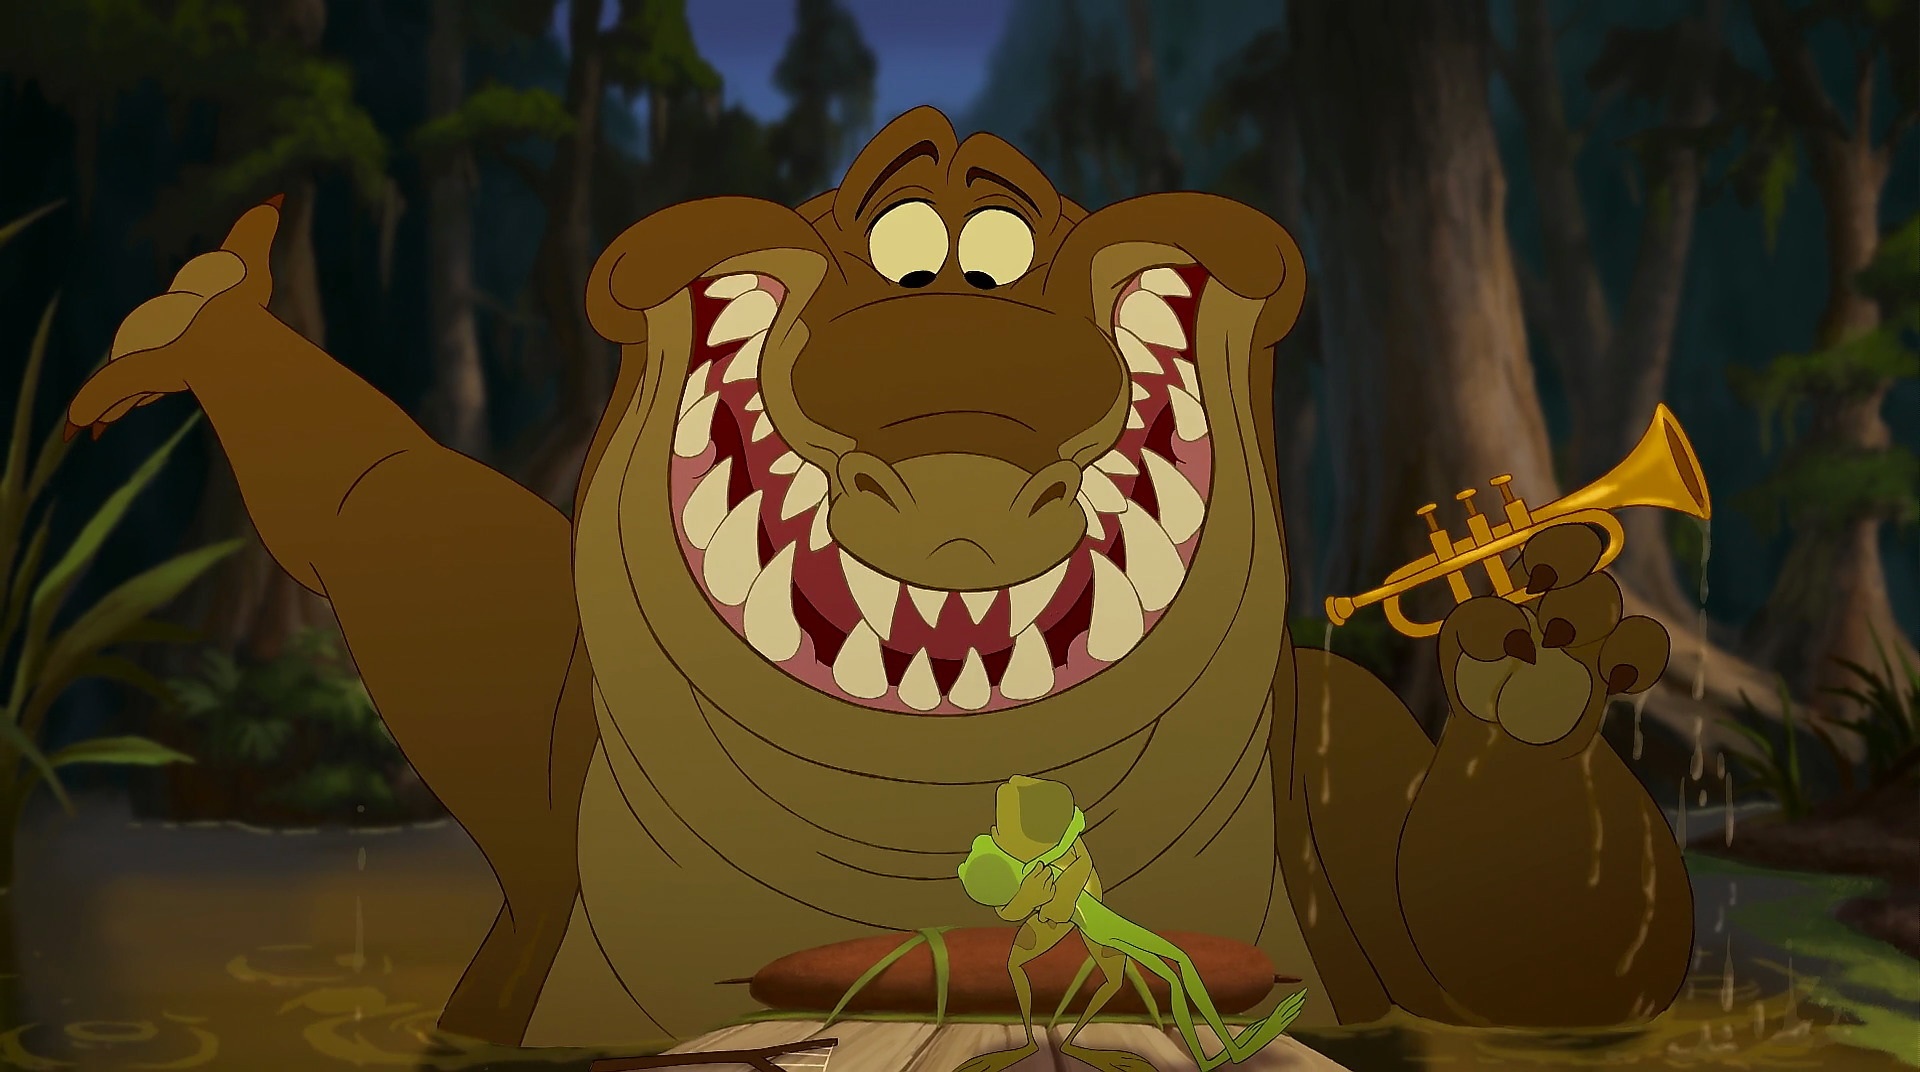 What is the name of the crocodile in Princess and the Frog?